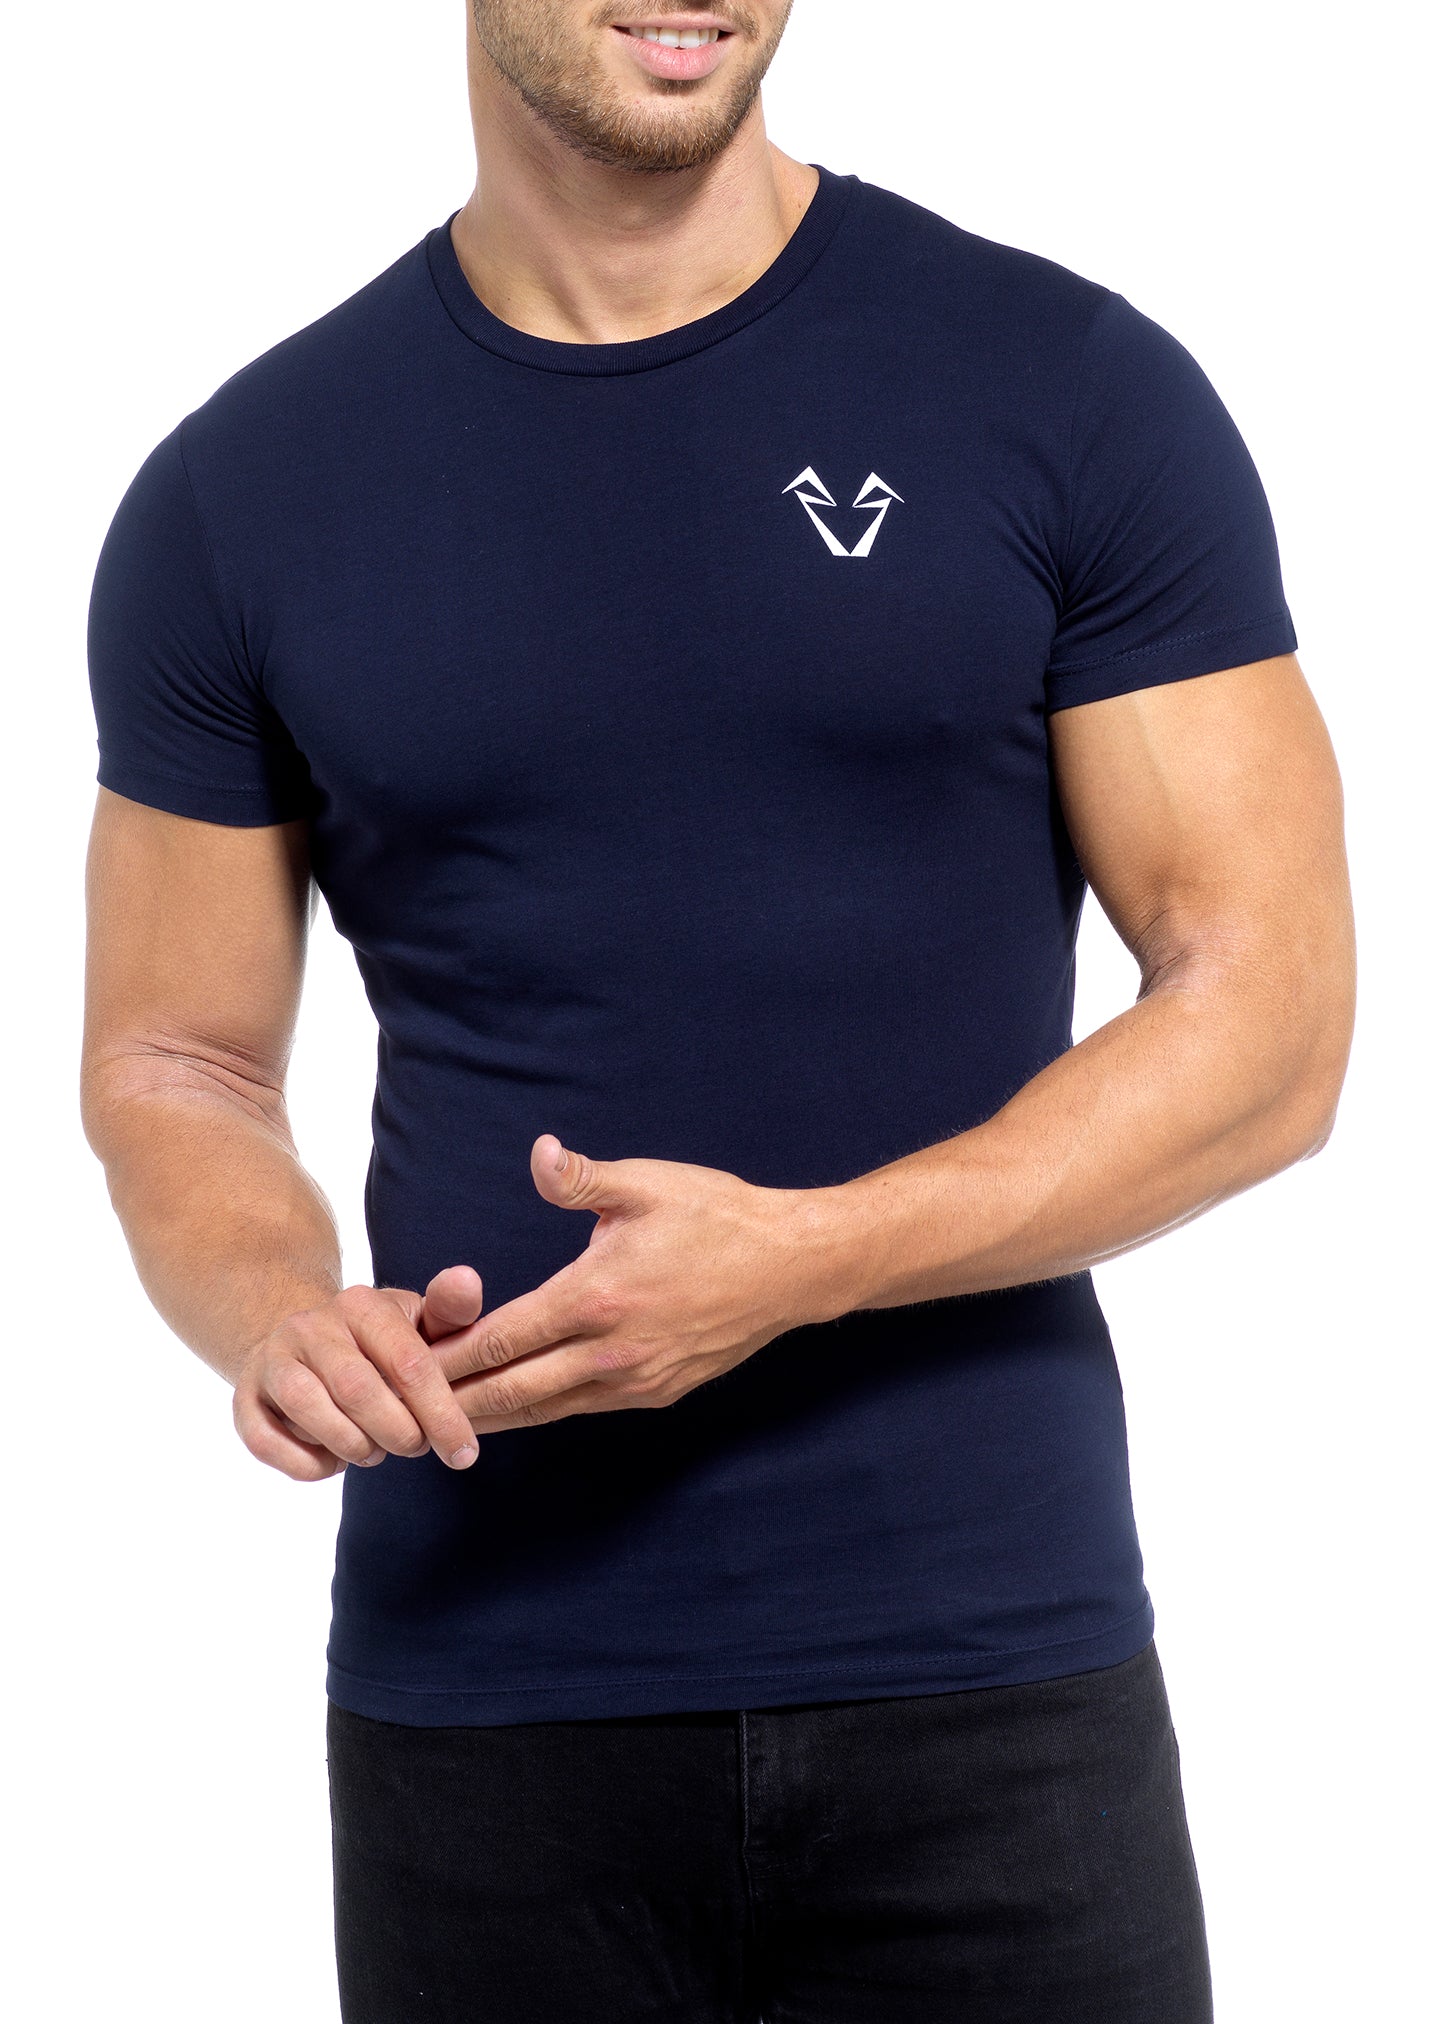 Mens Muscle Fit Navy T Shirt